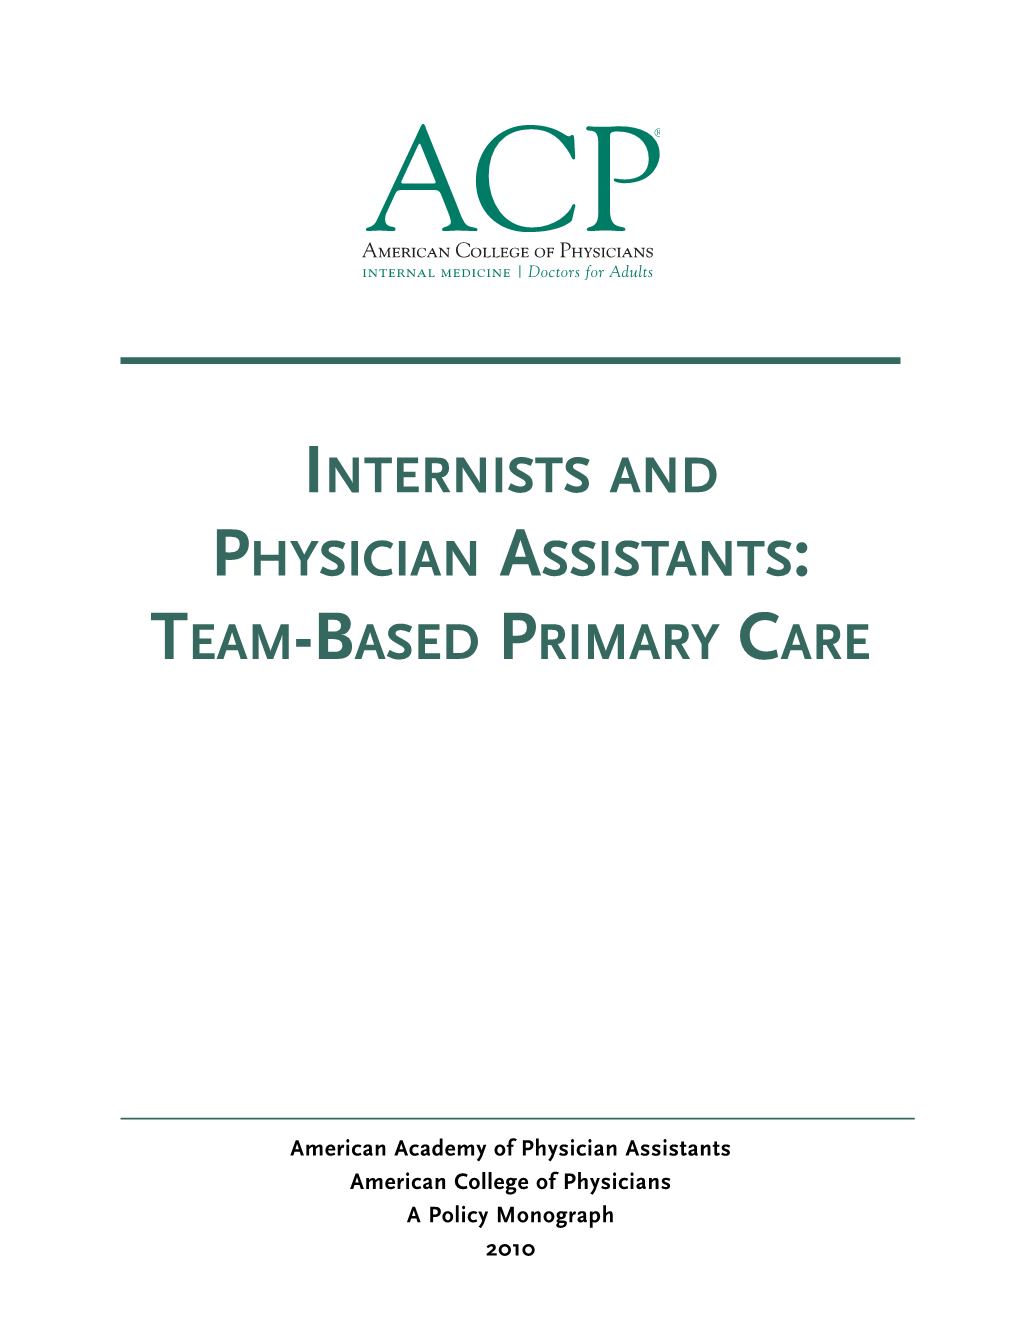 Internists and Physician Assistants: Team-Based Primary Care